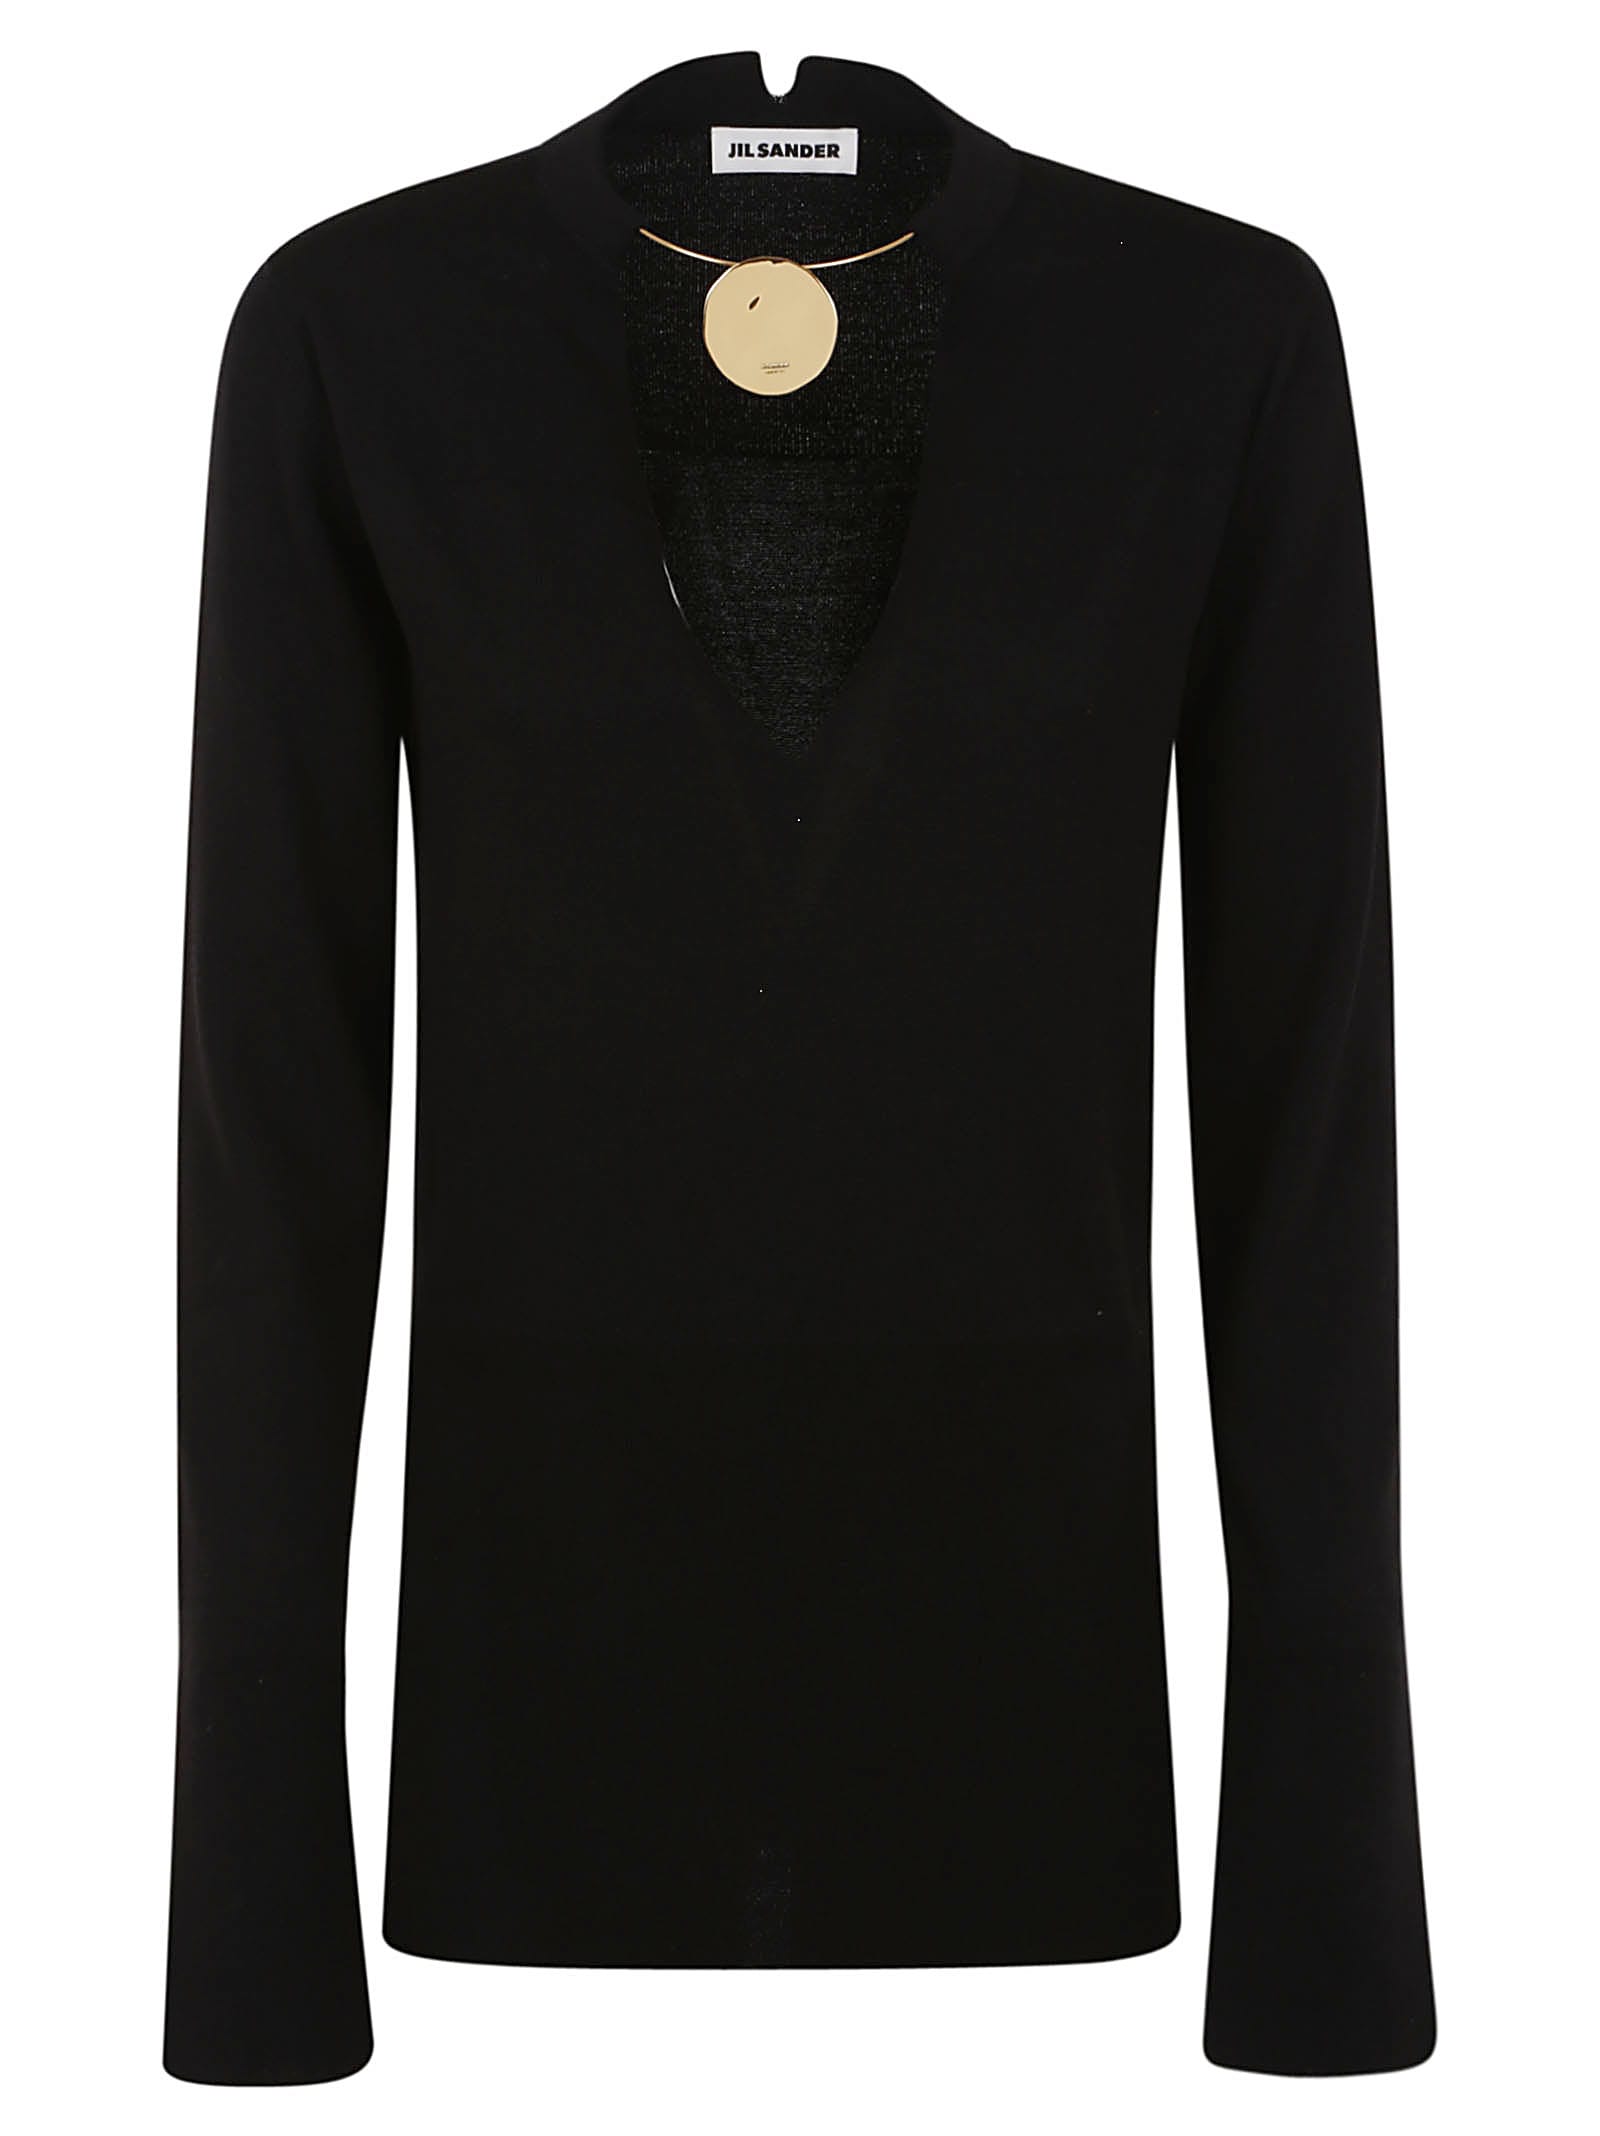 JIL SANDER SUPERFINE MERINO CREW NECK LONG SLEEVE KNIT WITH INTEGRATED JEWEL NECKLACE